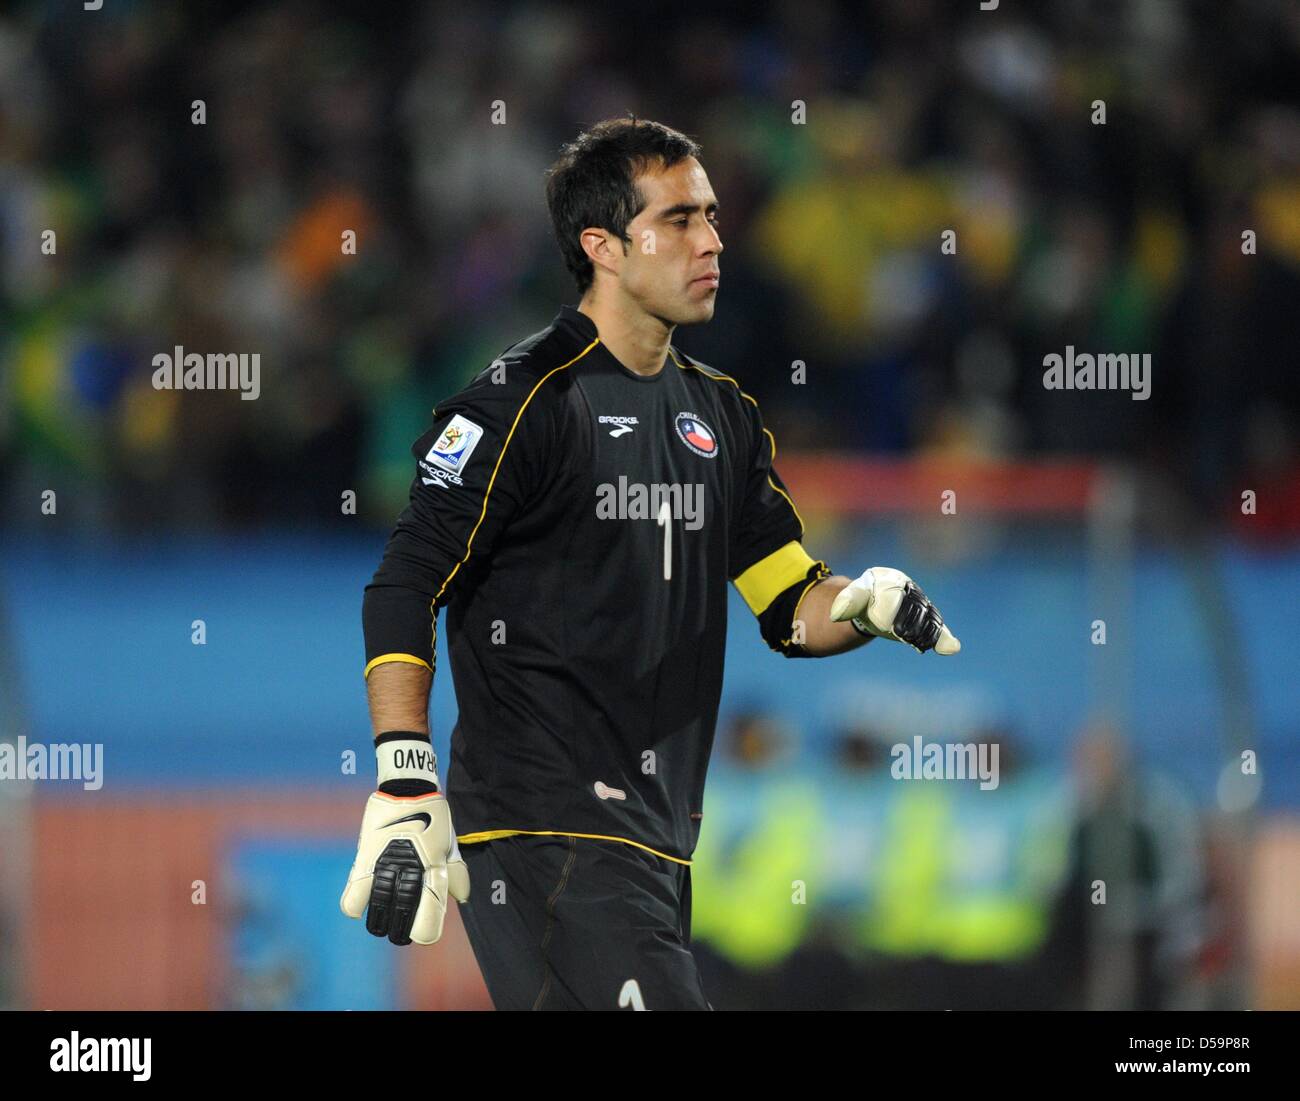 Chile's goalkeeper Claudio Bravo during the 2010 FIFA World Cup Round of Sixteen match between Brazil and Chile at the Ellis Park Stadium in Johannesburg, South Africa 28 June 2010. Photo: Marcus Brandt dpa - Please refer to http://dpaq.de/FIFA-WM2010-TC Stock Photo